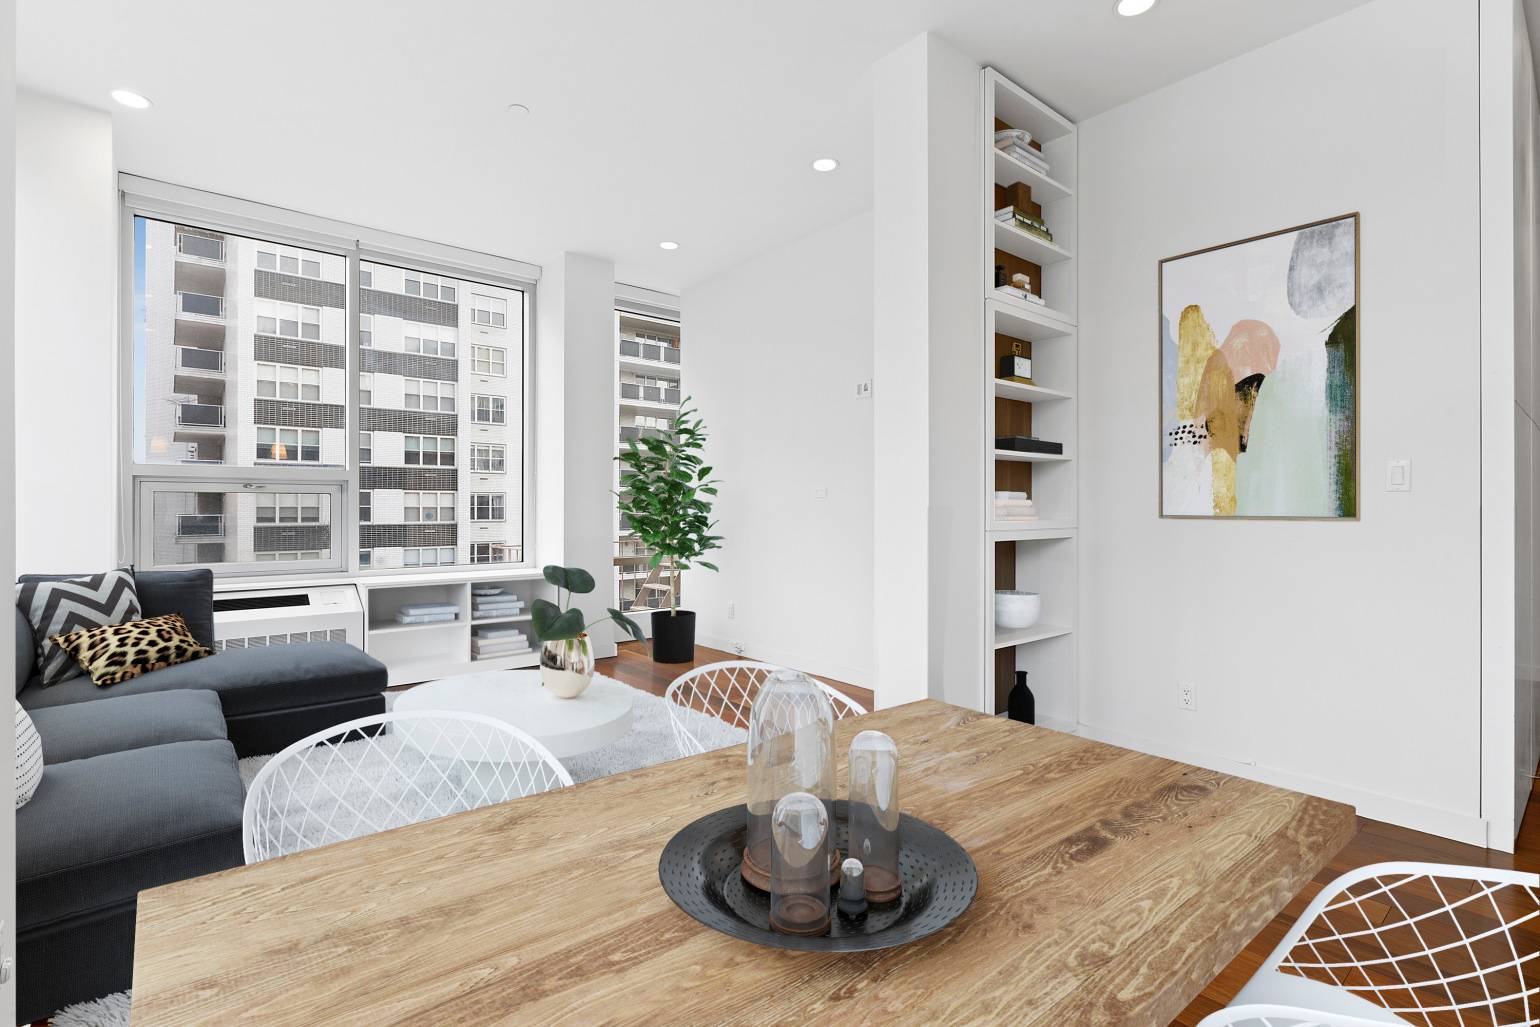 Residence 6B at 148 East 19th Street is an exceptionally bright and stunning corner 2 bedroom, 2 full bath home.